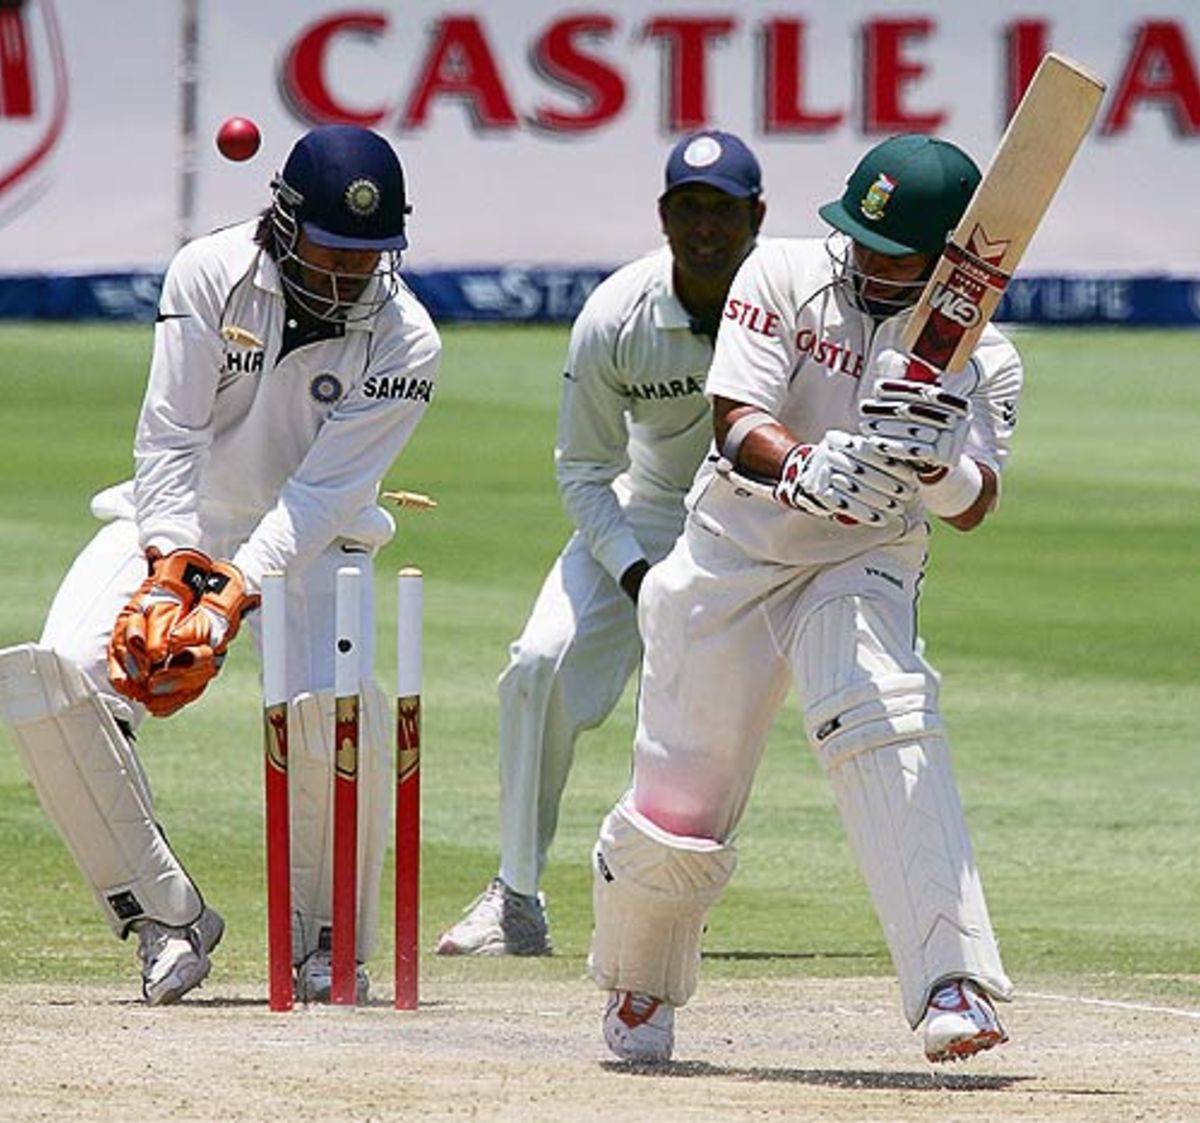 Ashwell Prince is bowled through the gate by Anil Kumble, South Africa v India, 1st Test, Johannesburg, 4th day, December 18, 2006